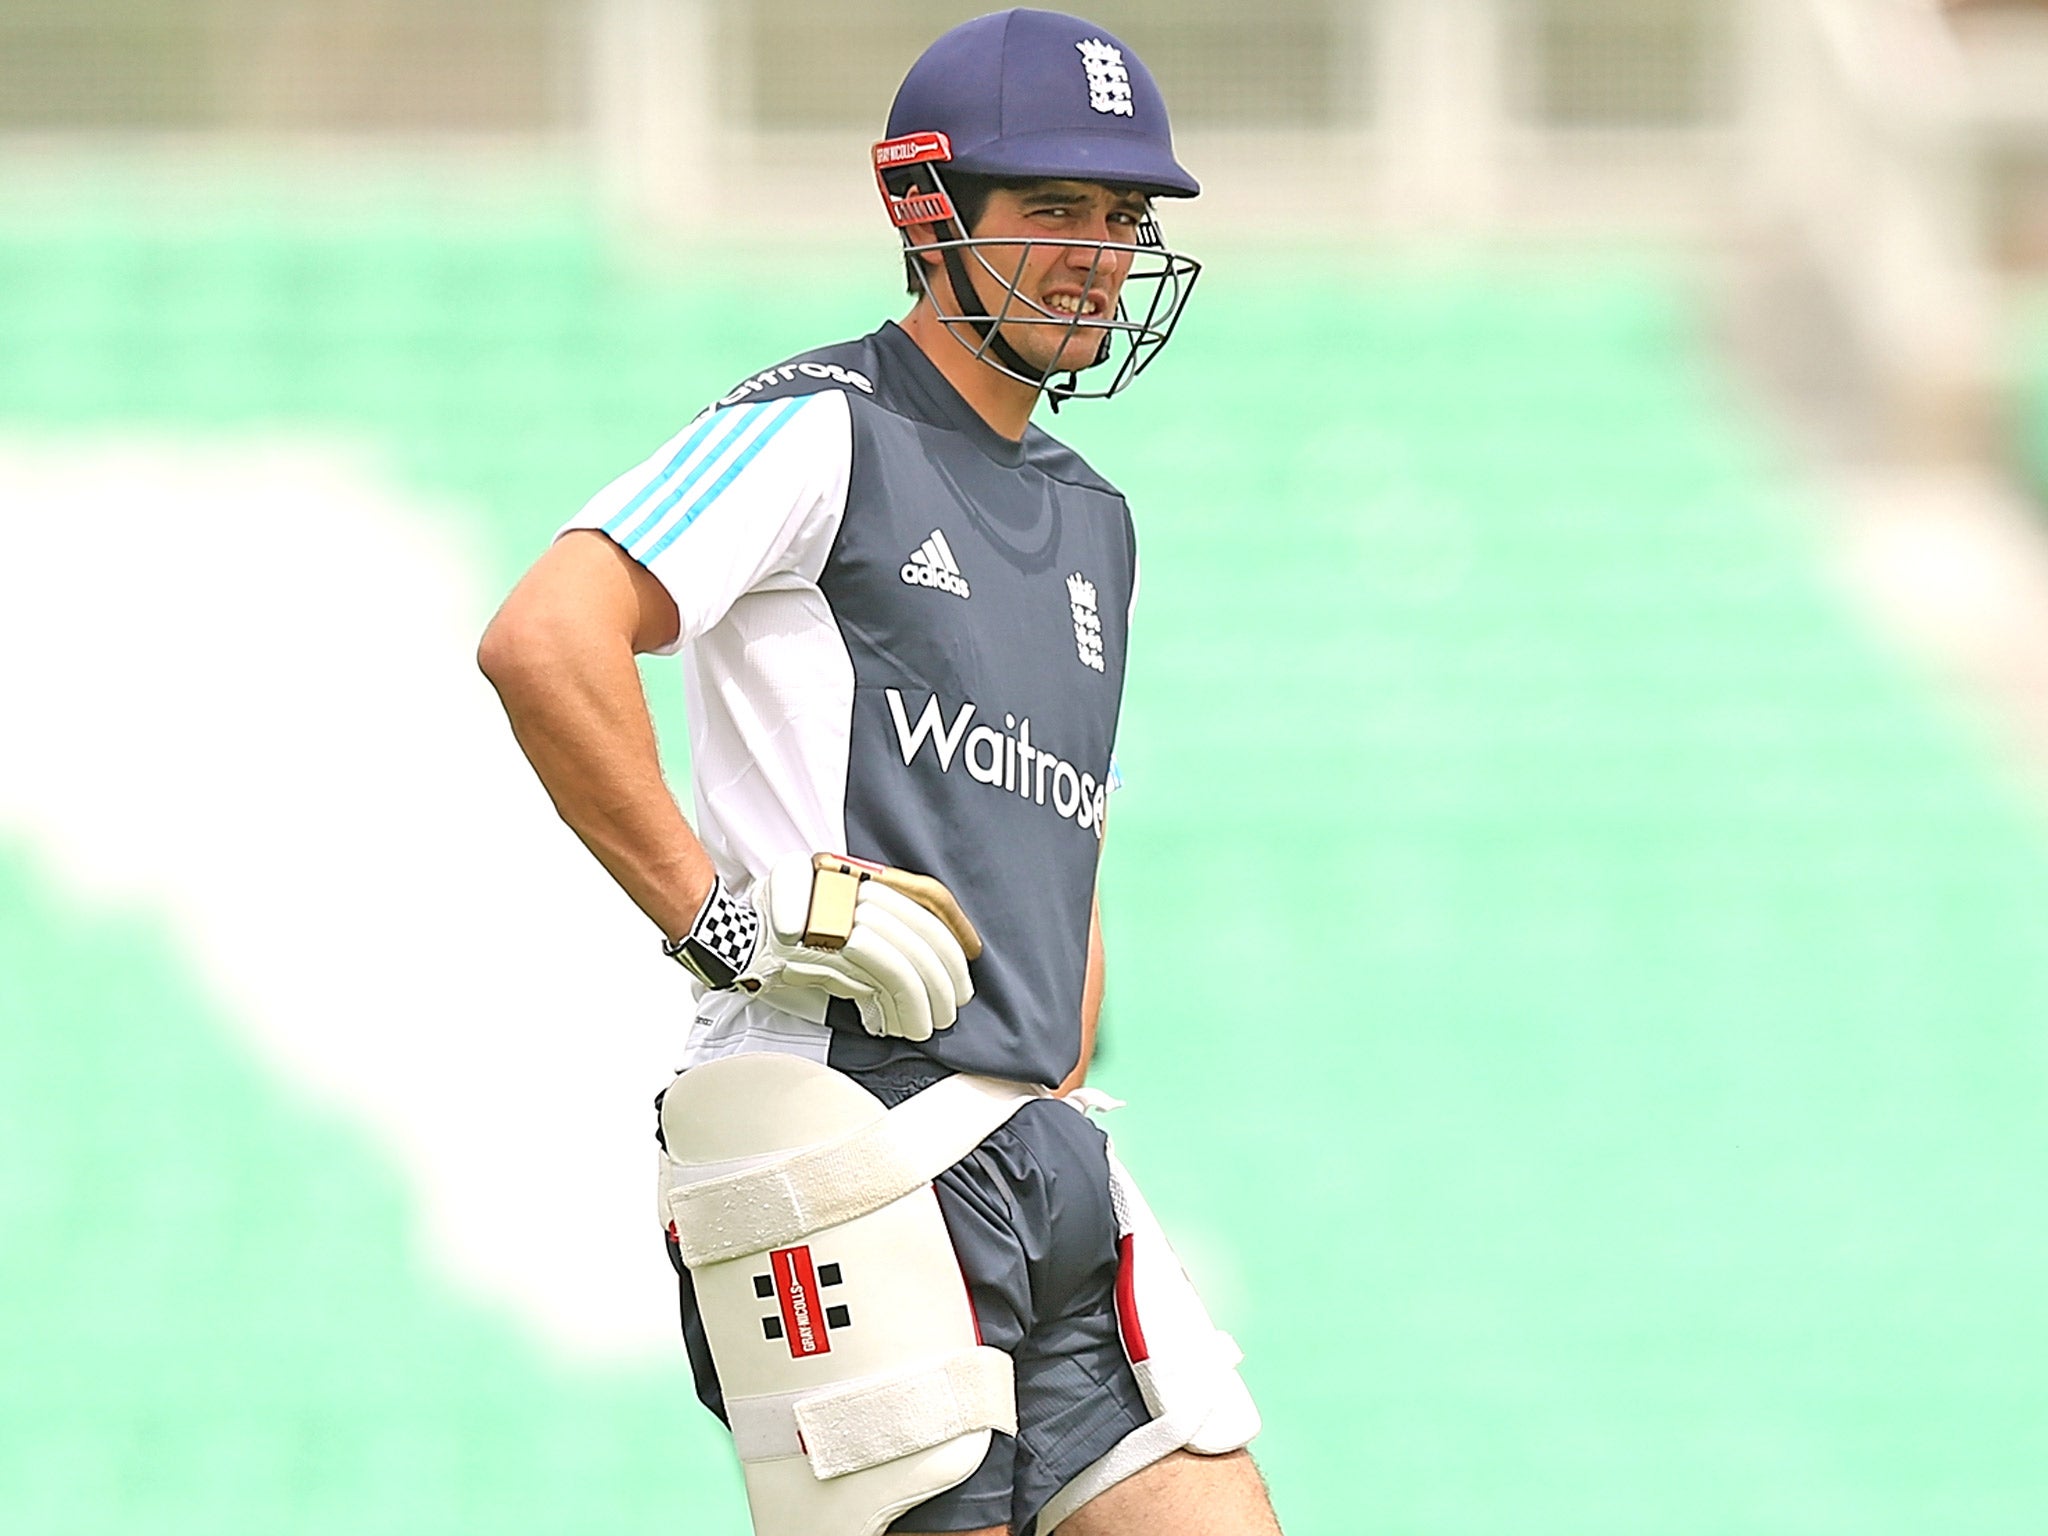 The England captain, Alastair Cook, has only nine months to build a team to win the World Cup